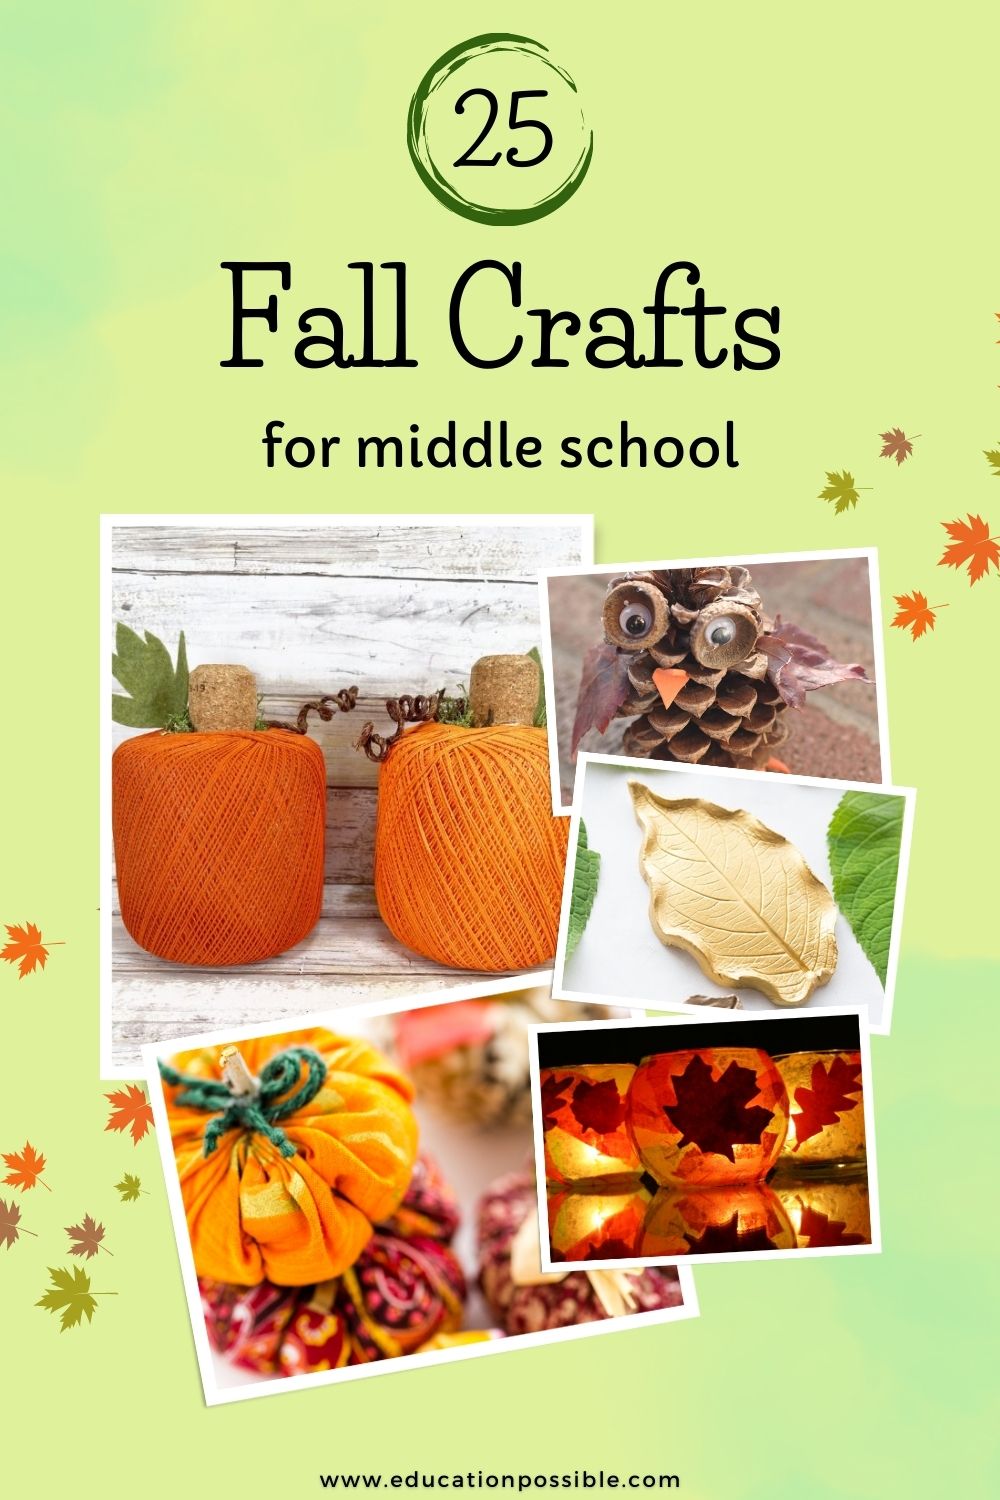 Collage of 5 different fall crafts to make during the season.